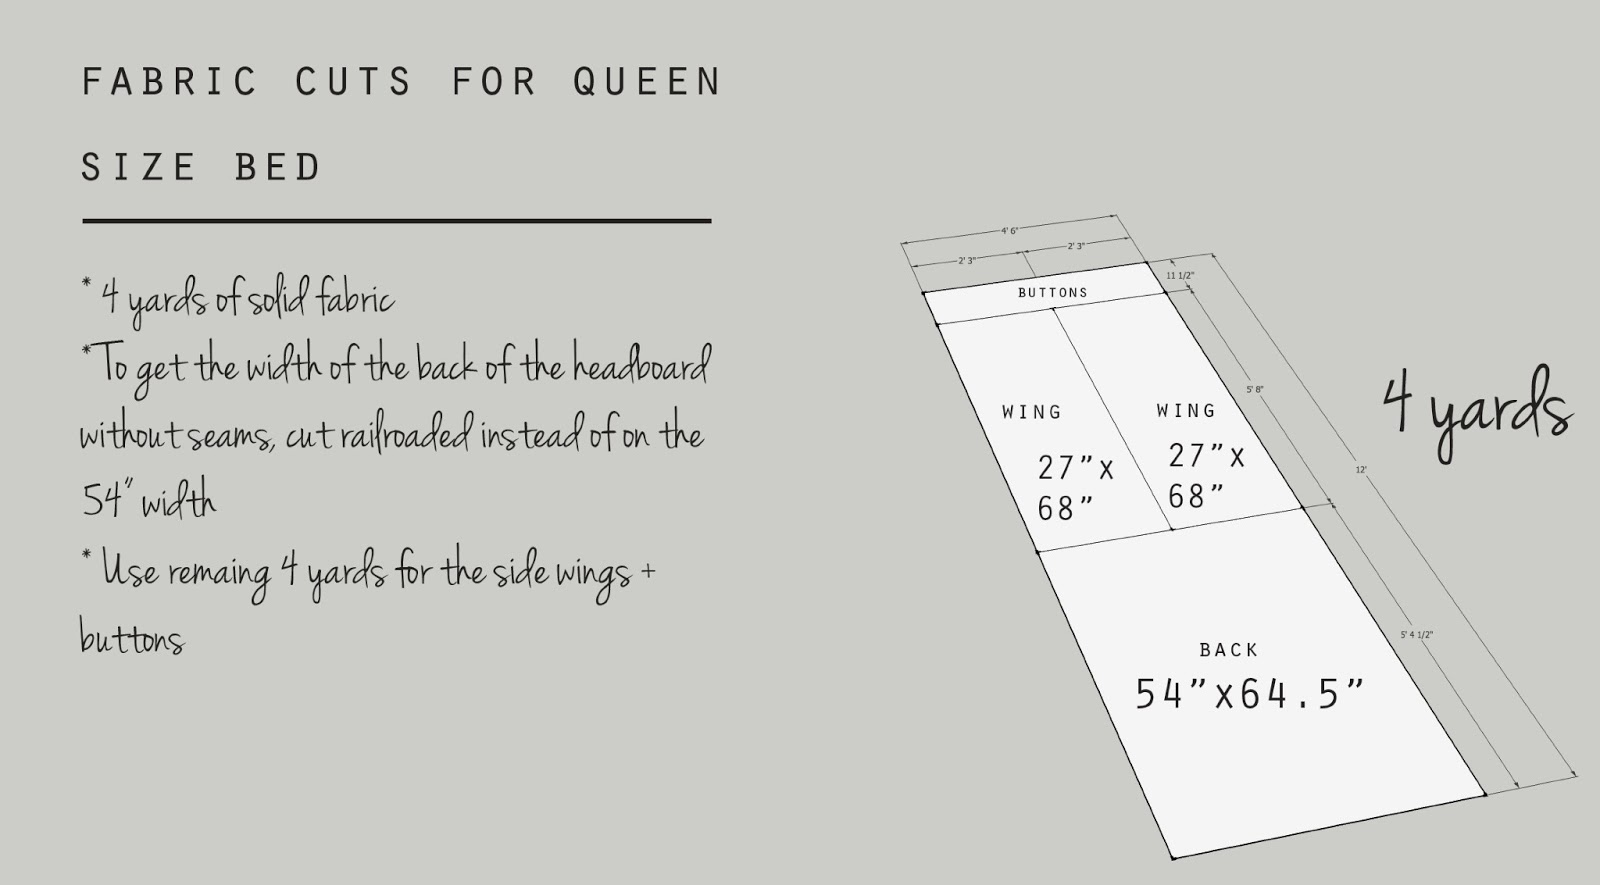 plans for building a queen size bed frame